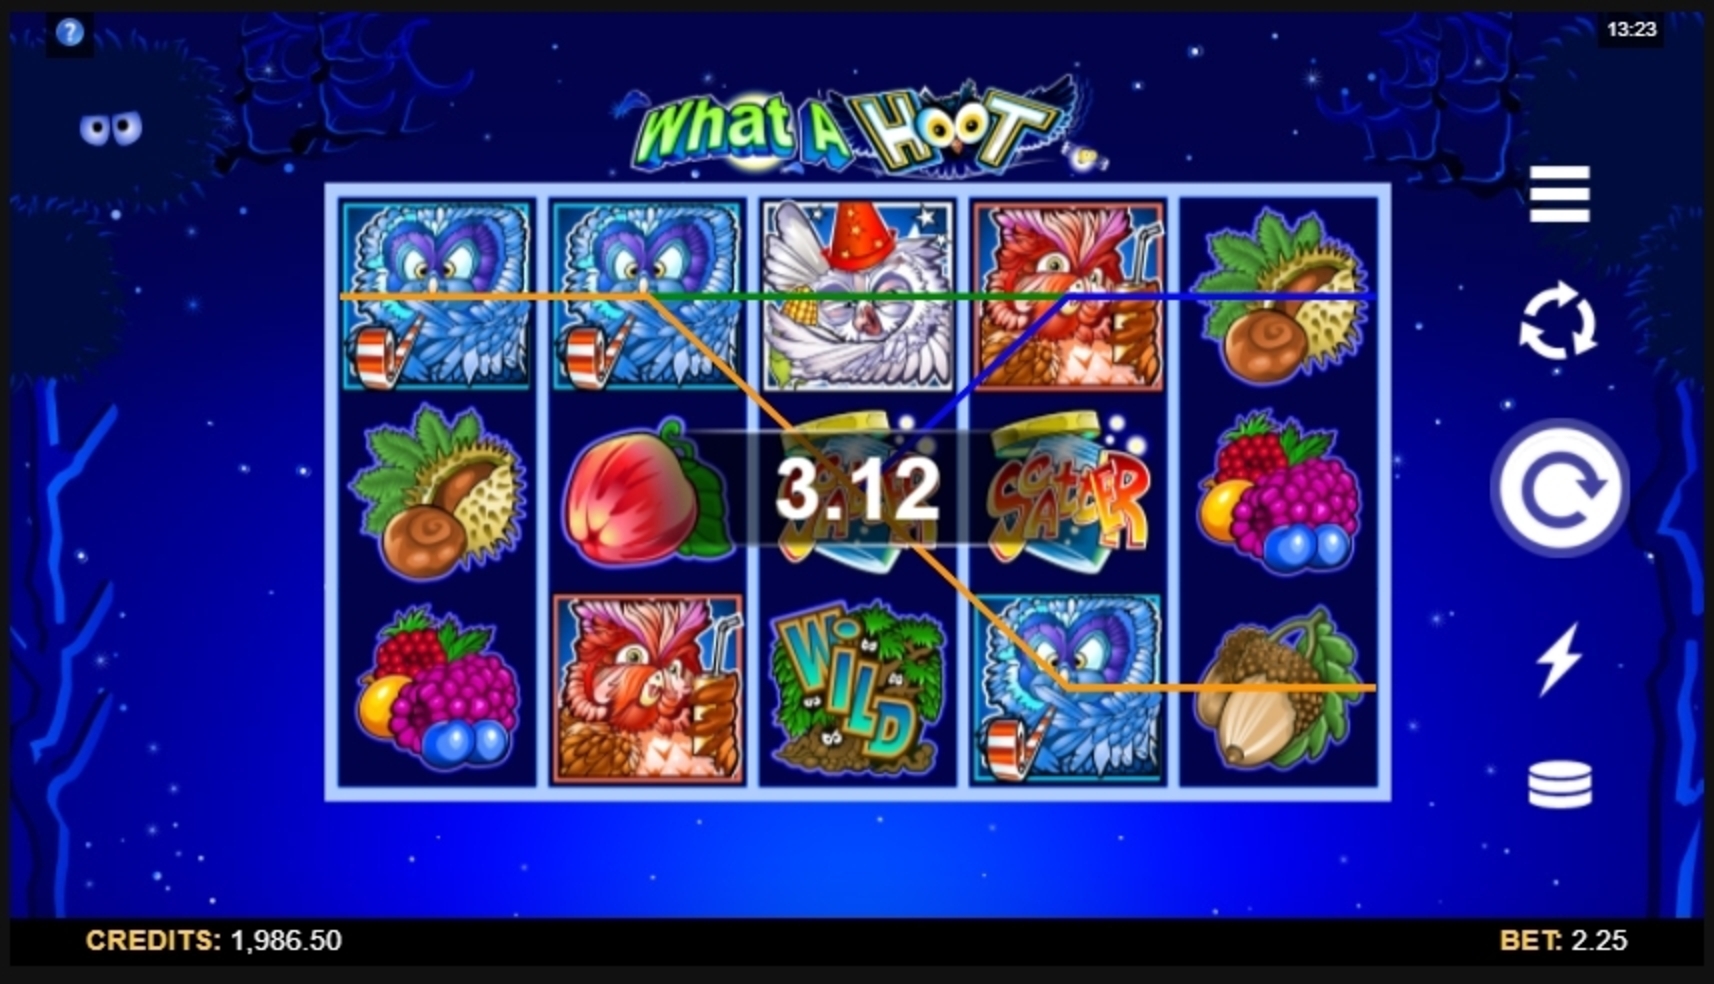 Win Money in What a Hoot Free Slot Game by Microgaming